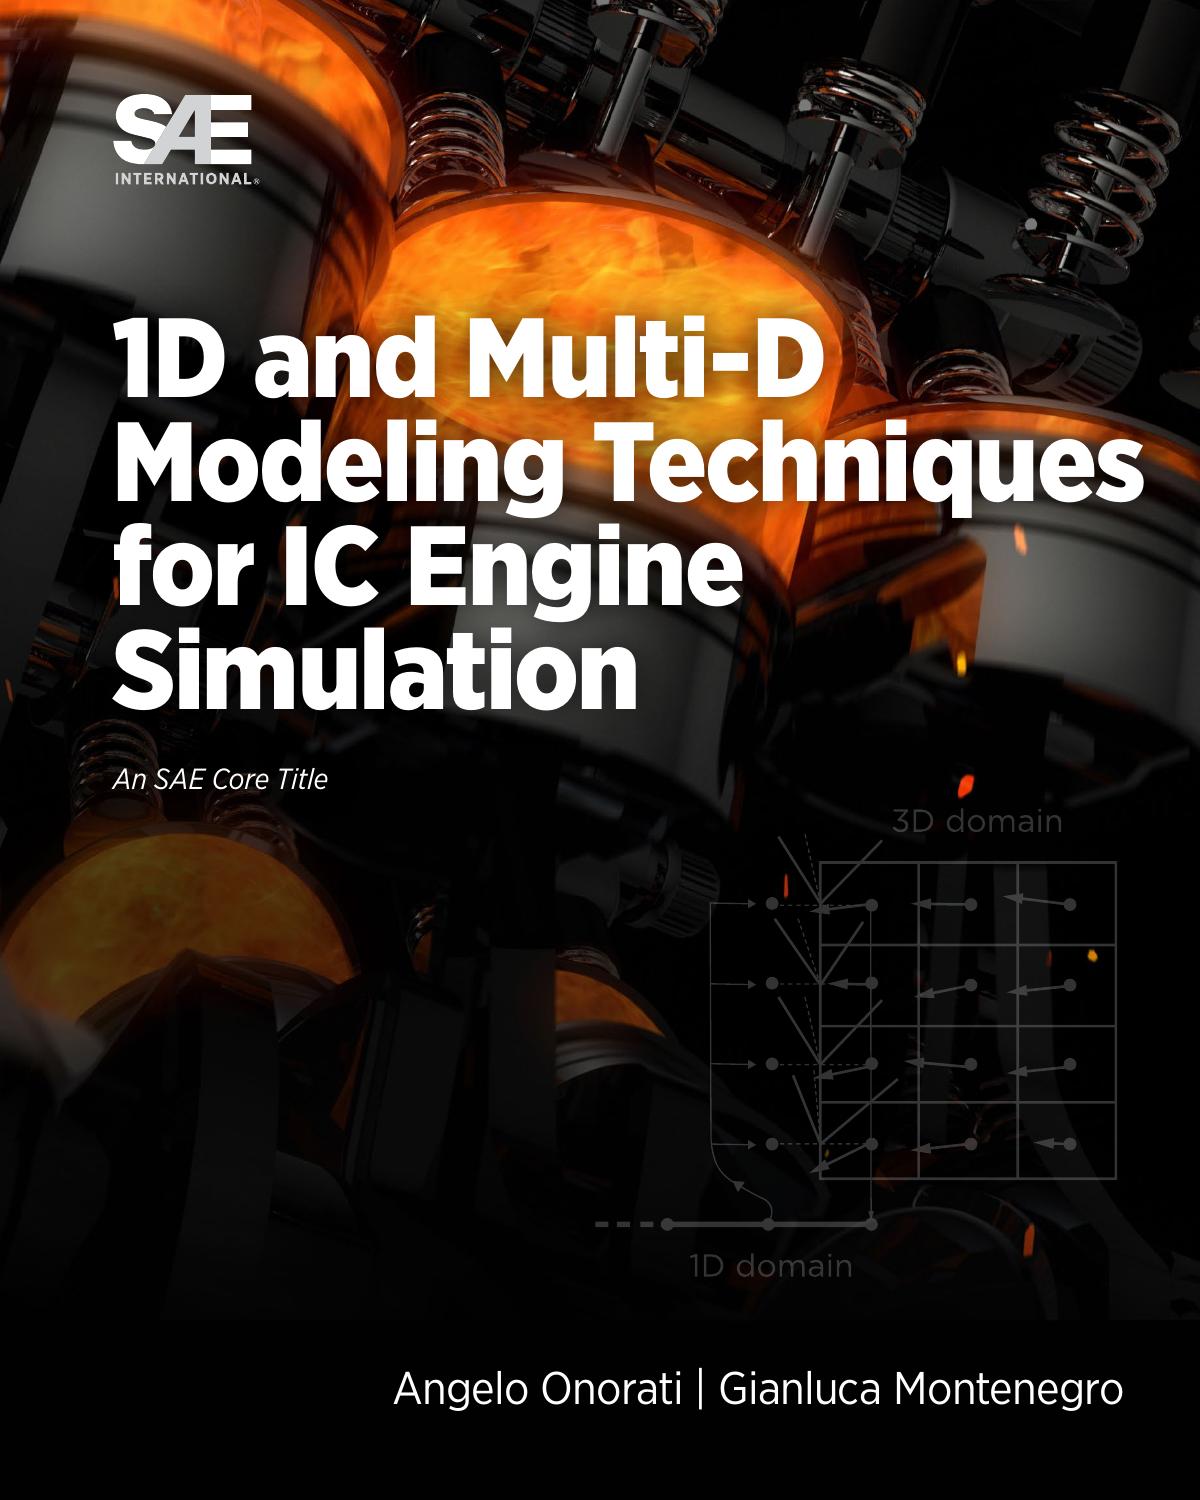 1D and Multi-D Modeling Techniques for IC Engine Simulation by Angelo Onorati; Gianluca Montenegro